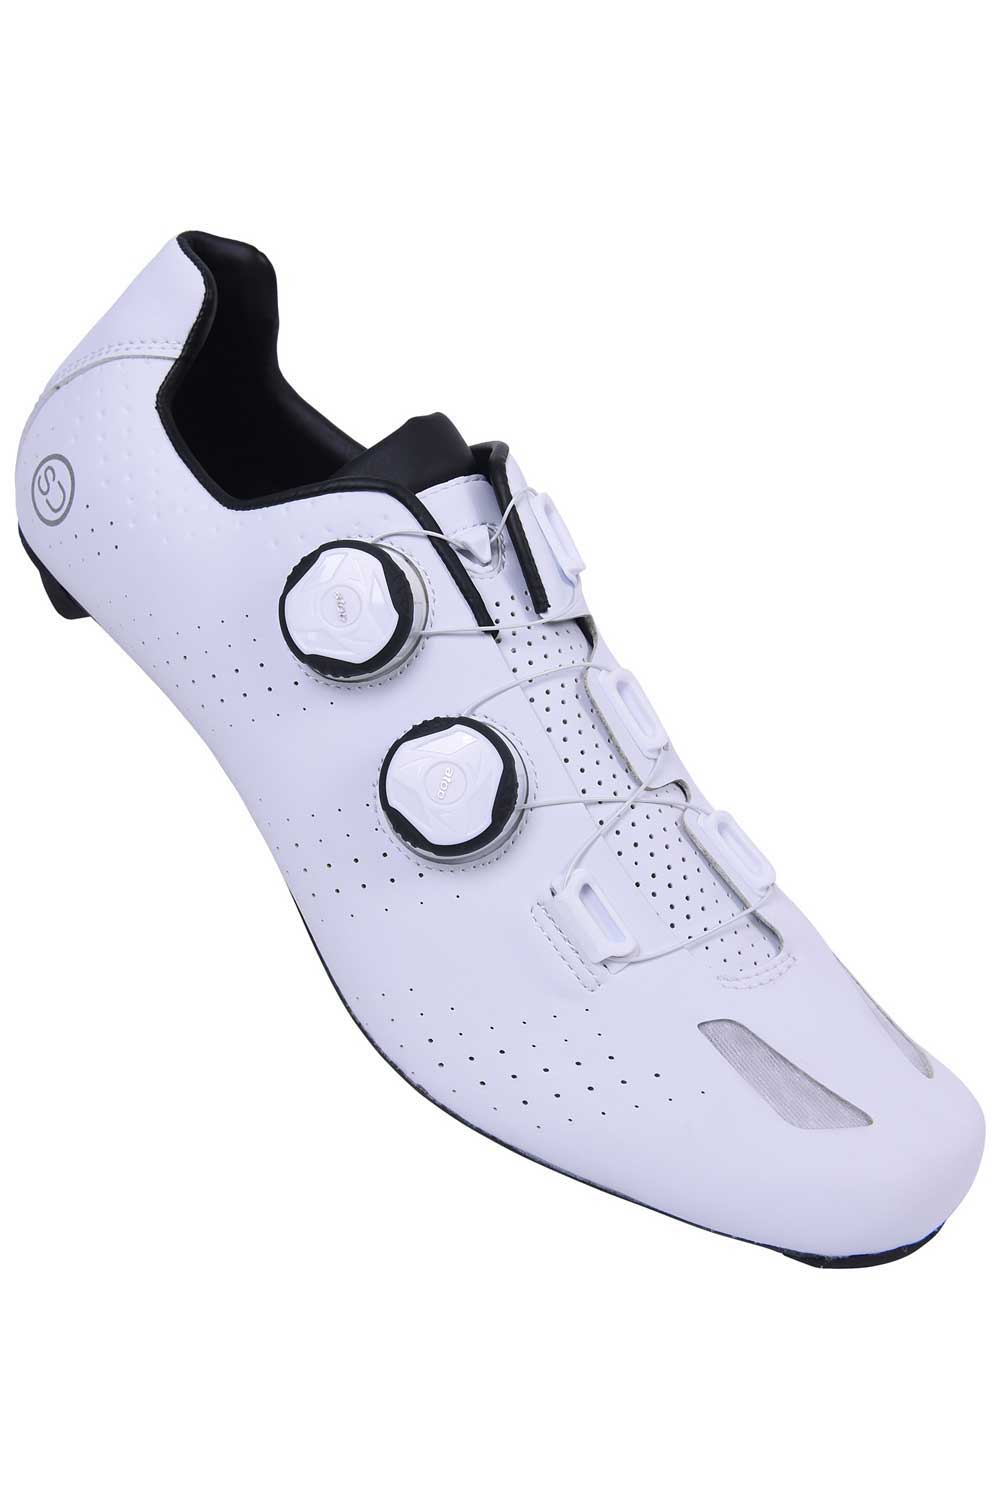 Sundried Cycling Shoes